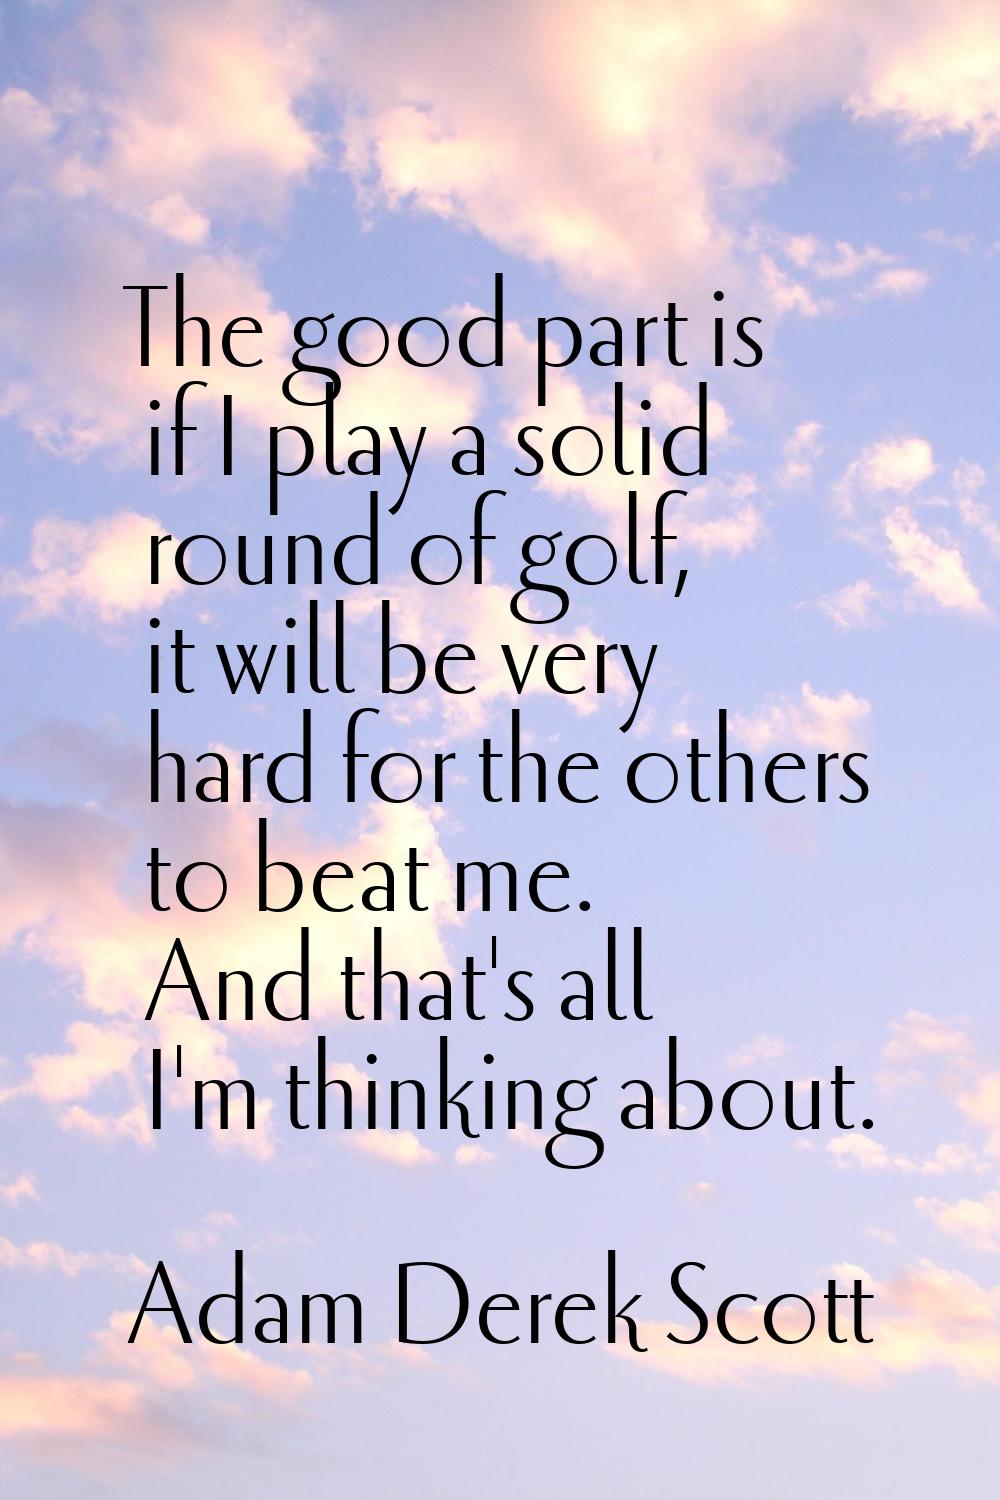 The good part is if I play a solid round of golf, it will be very hard for the others to beat me. A